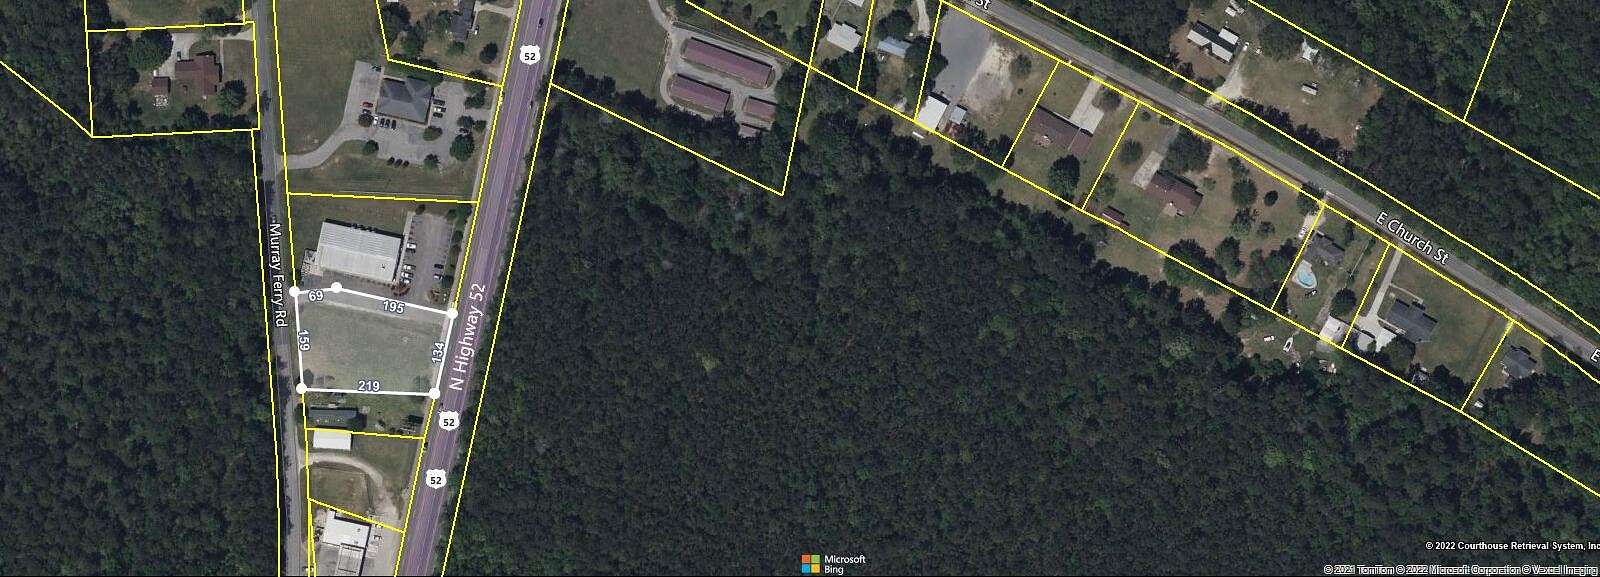 0.81 Acres of Mixed-Use Land for Sale in Bonneau, South Carolina